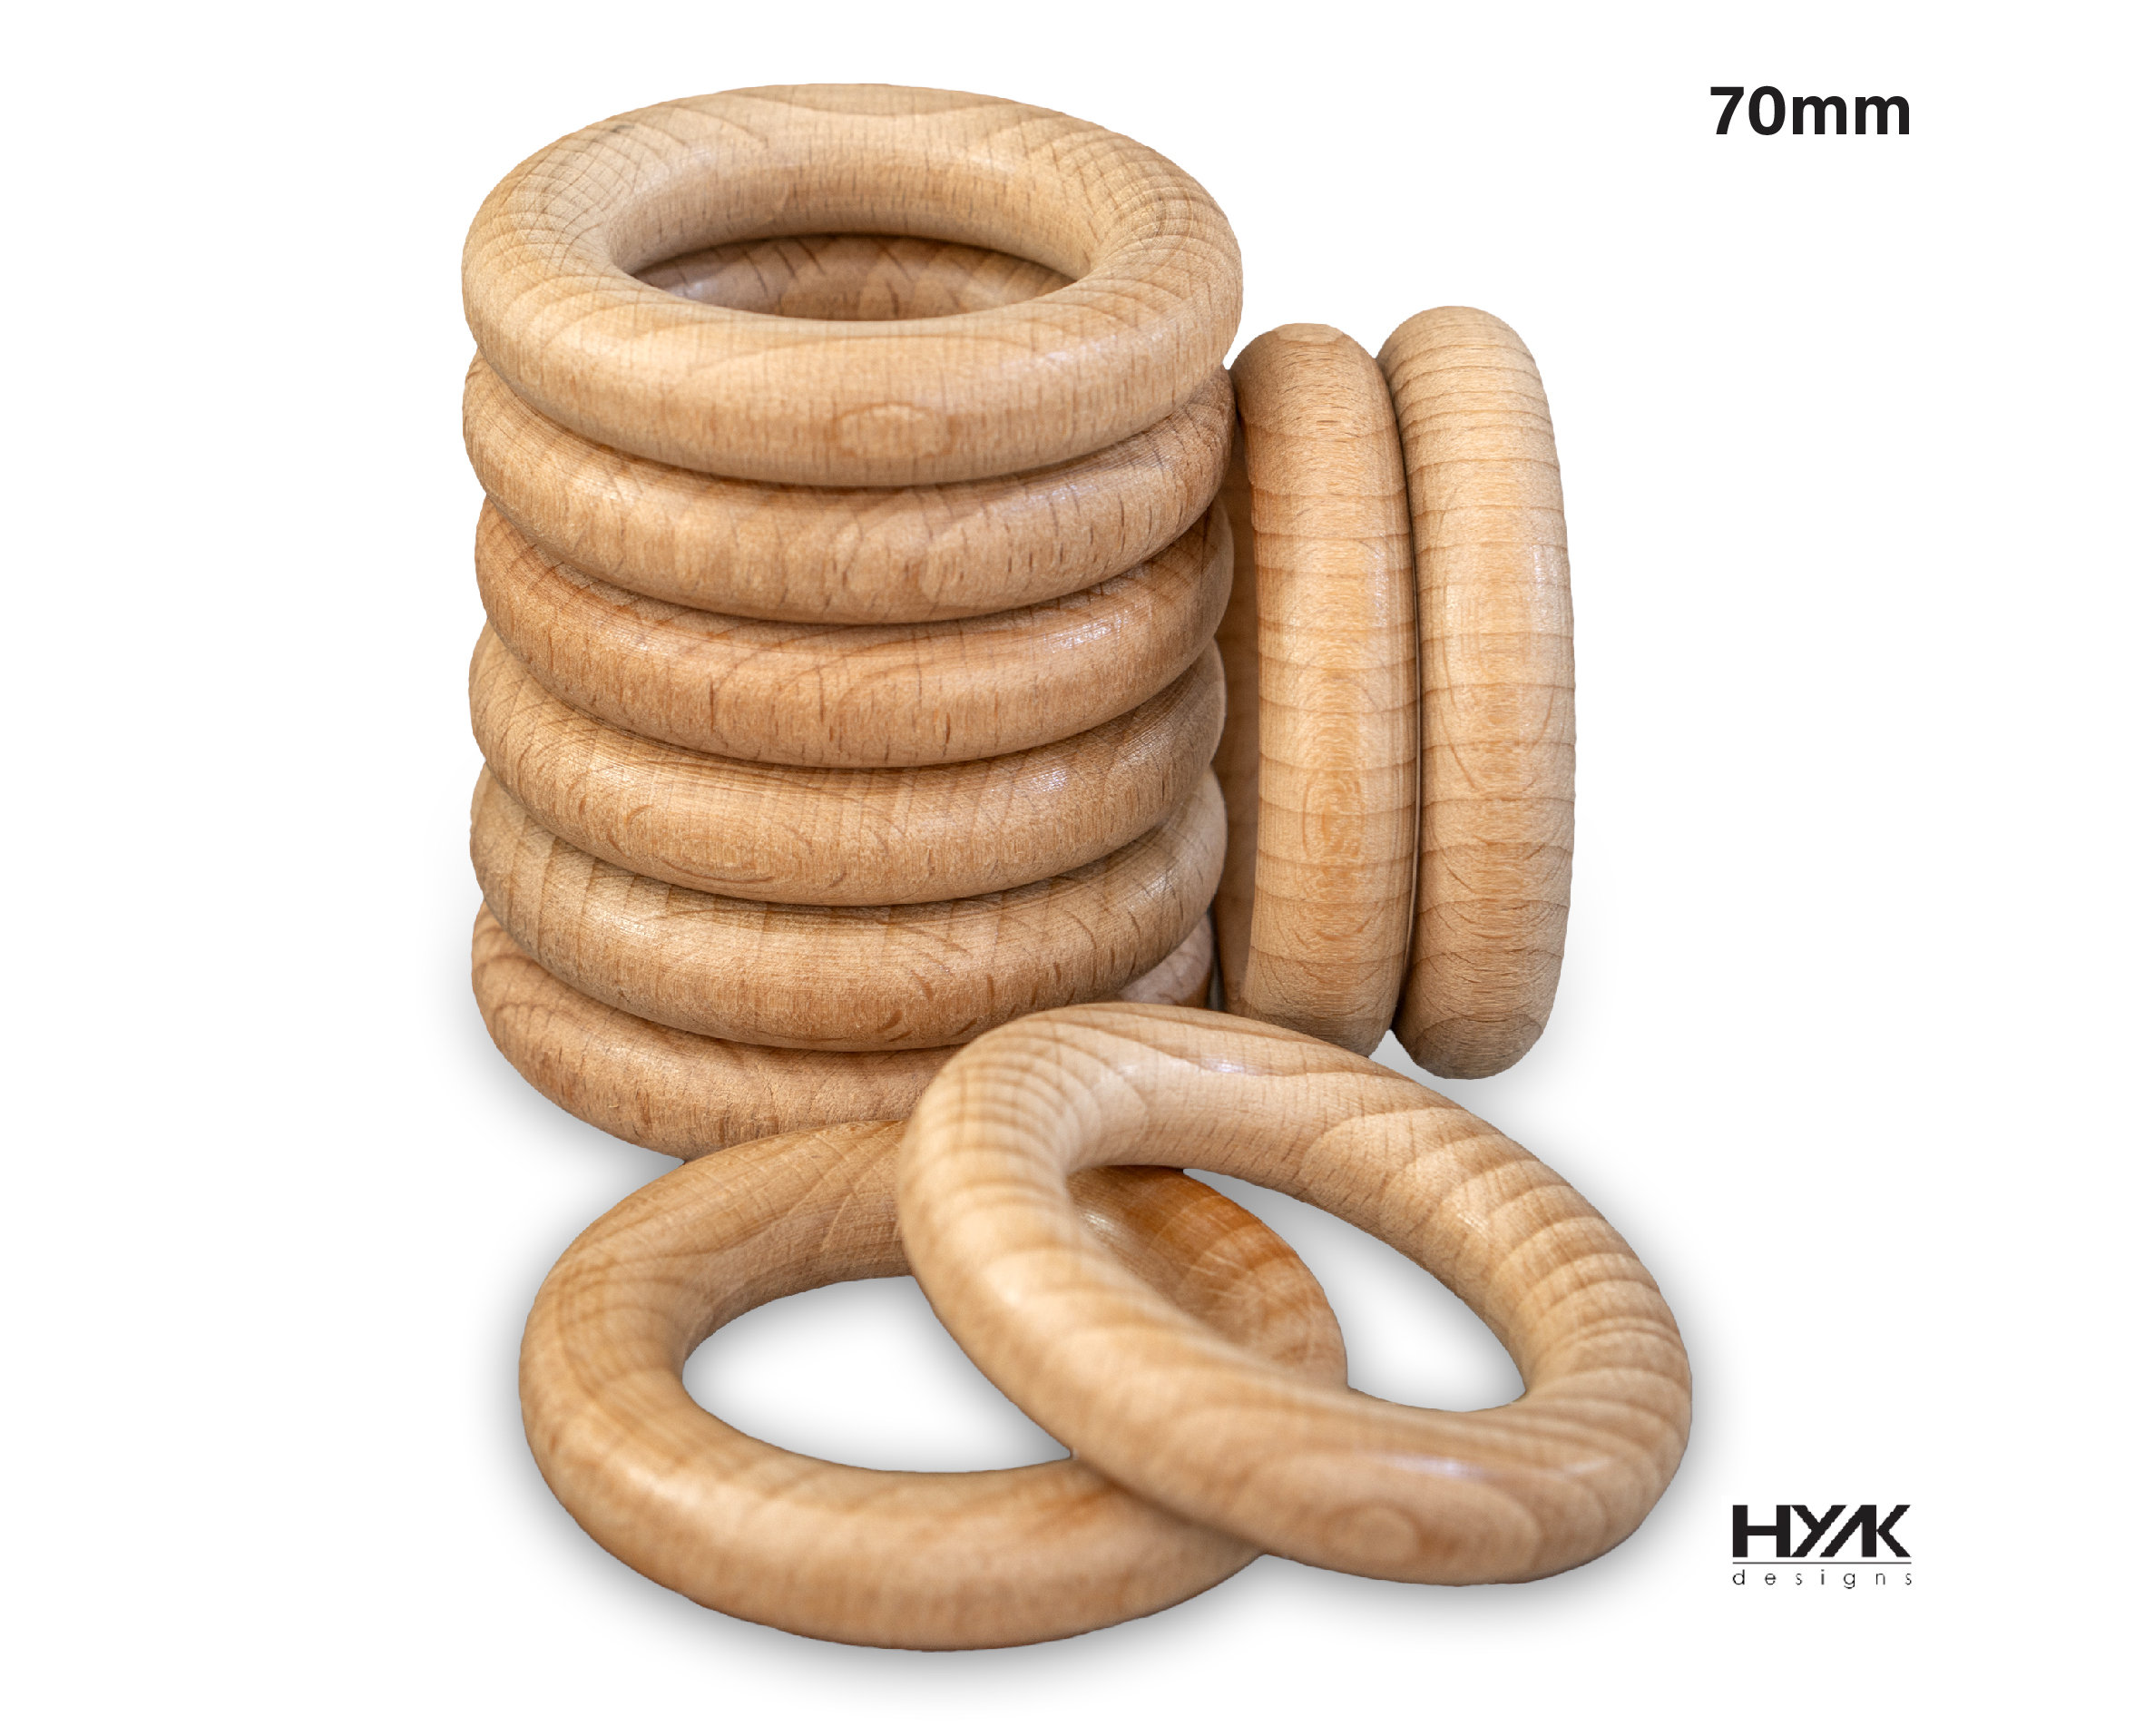 Wooden Rings for Macramé – WelcomeYarn